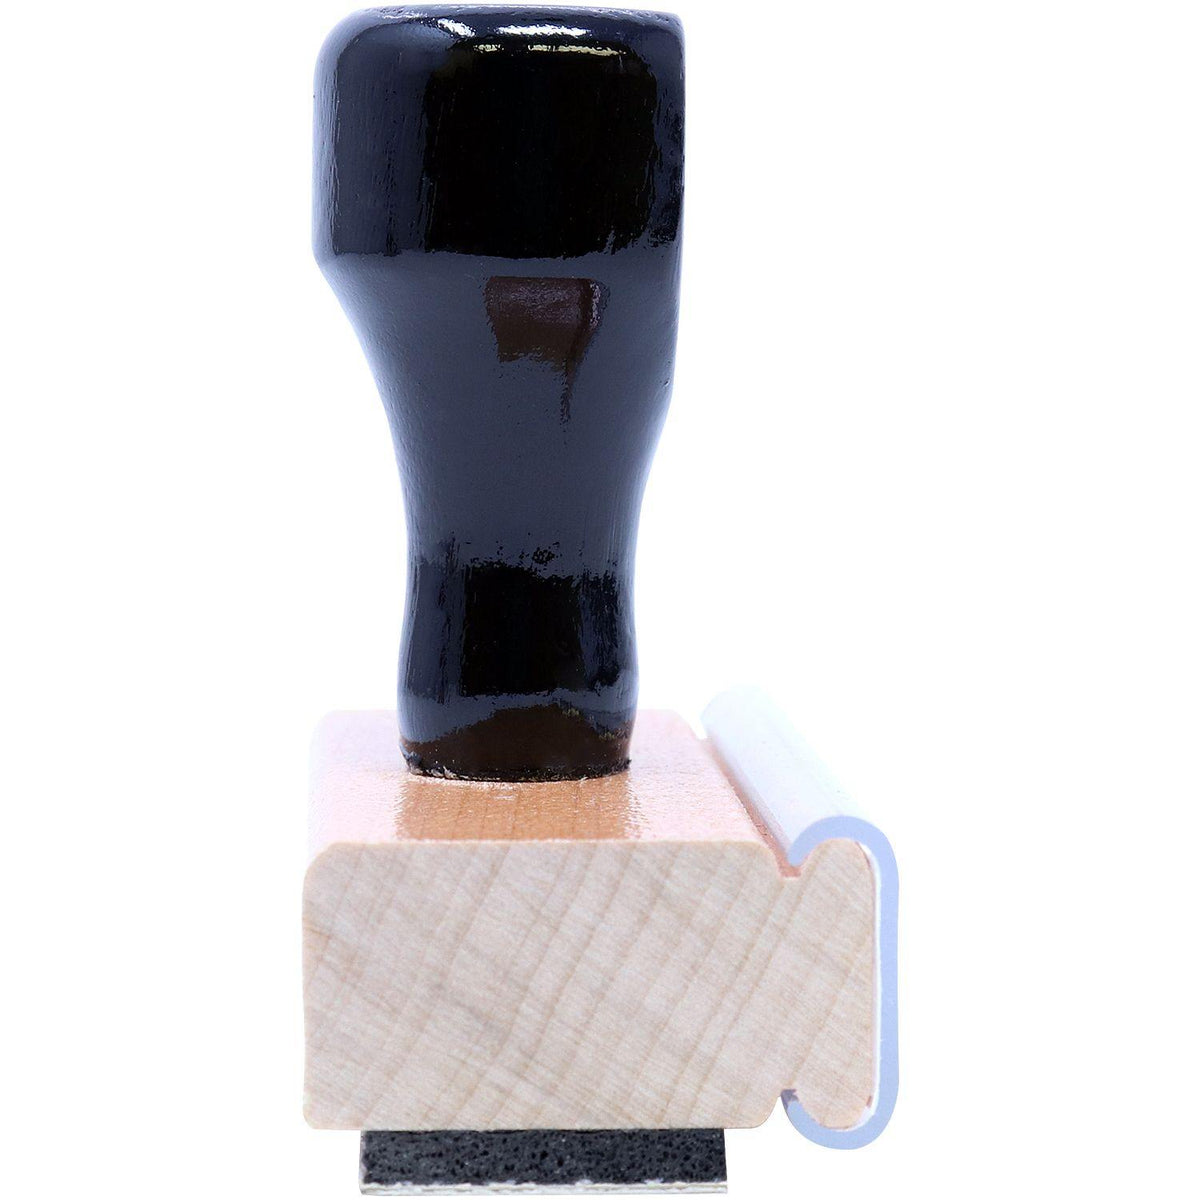 Narrow Font Return Receipt Requested Rubber Stamp - Engineer Seal Stamps - Brand_Acorn, Impression Size_Small, Stamp Type_Regular Stamp, Type of Use_Office, Type of Use_Postal &amp; Mailing